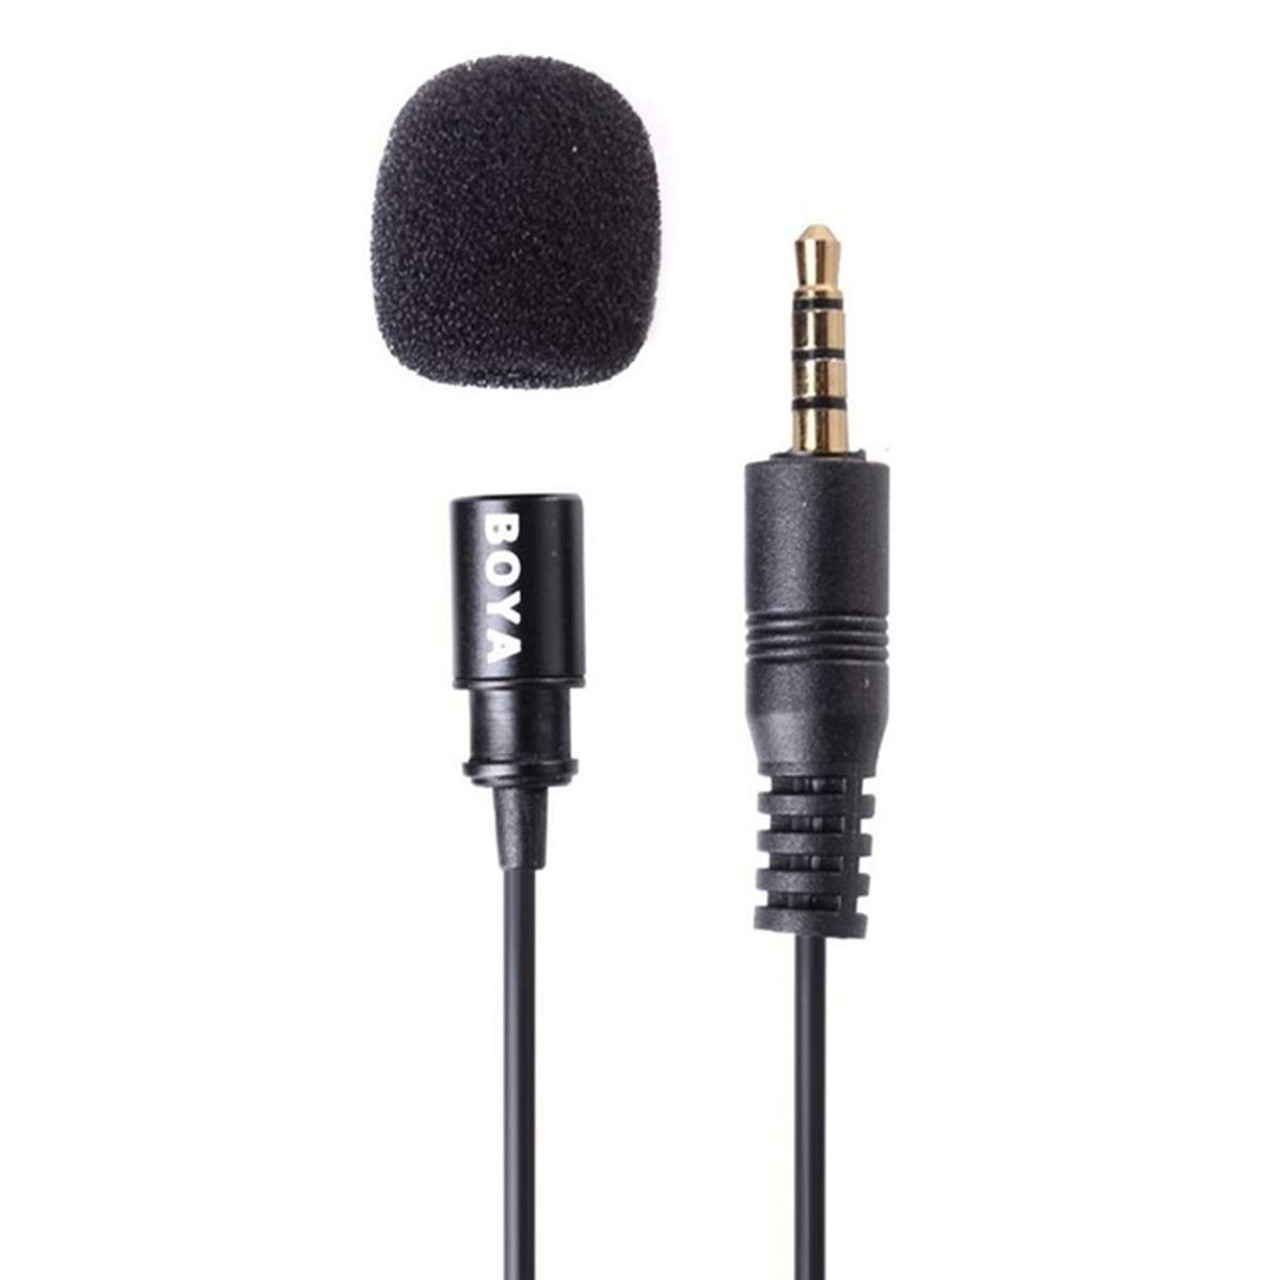 Boya by-lm10 External Microphone product image